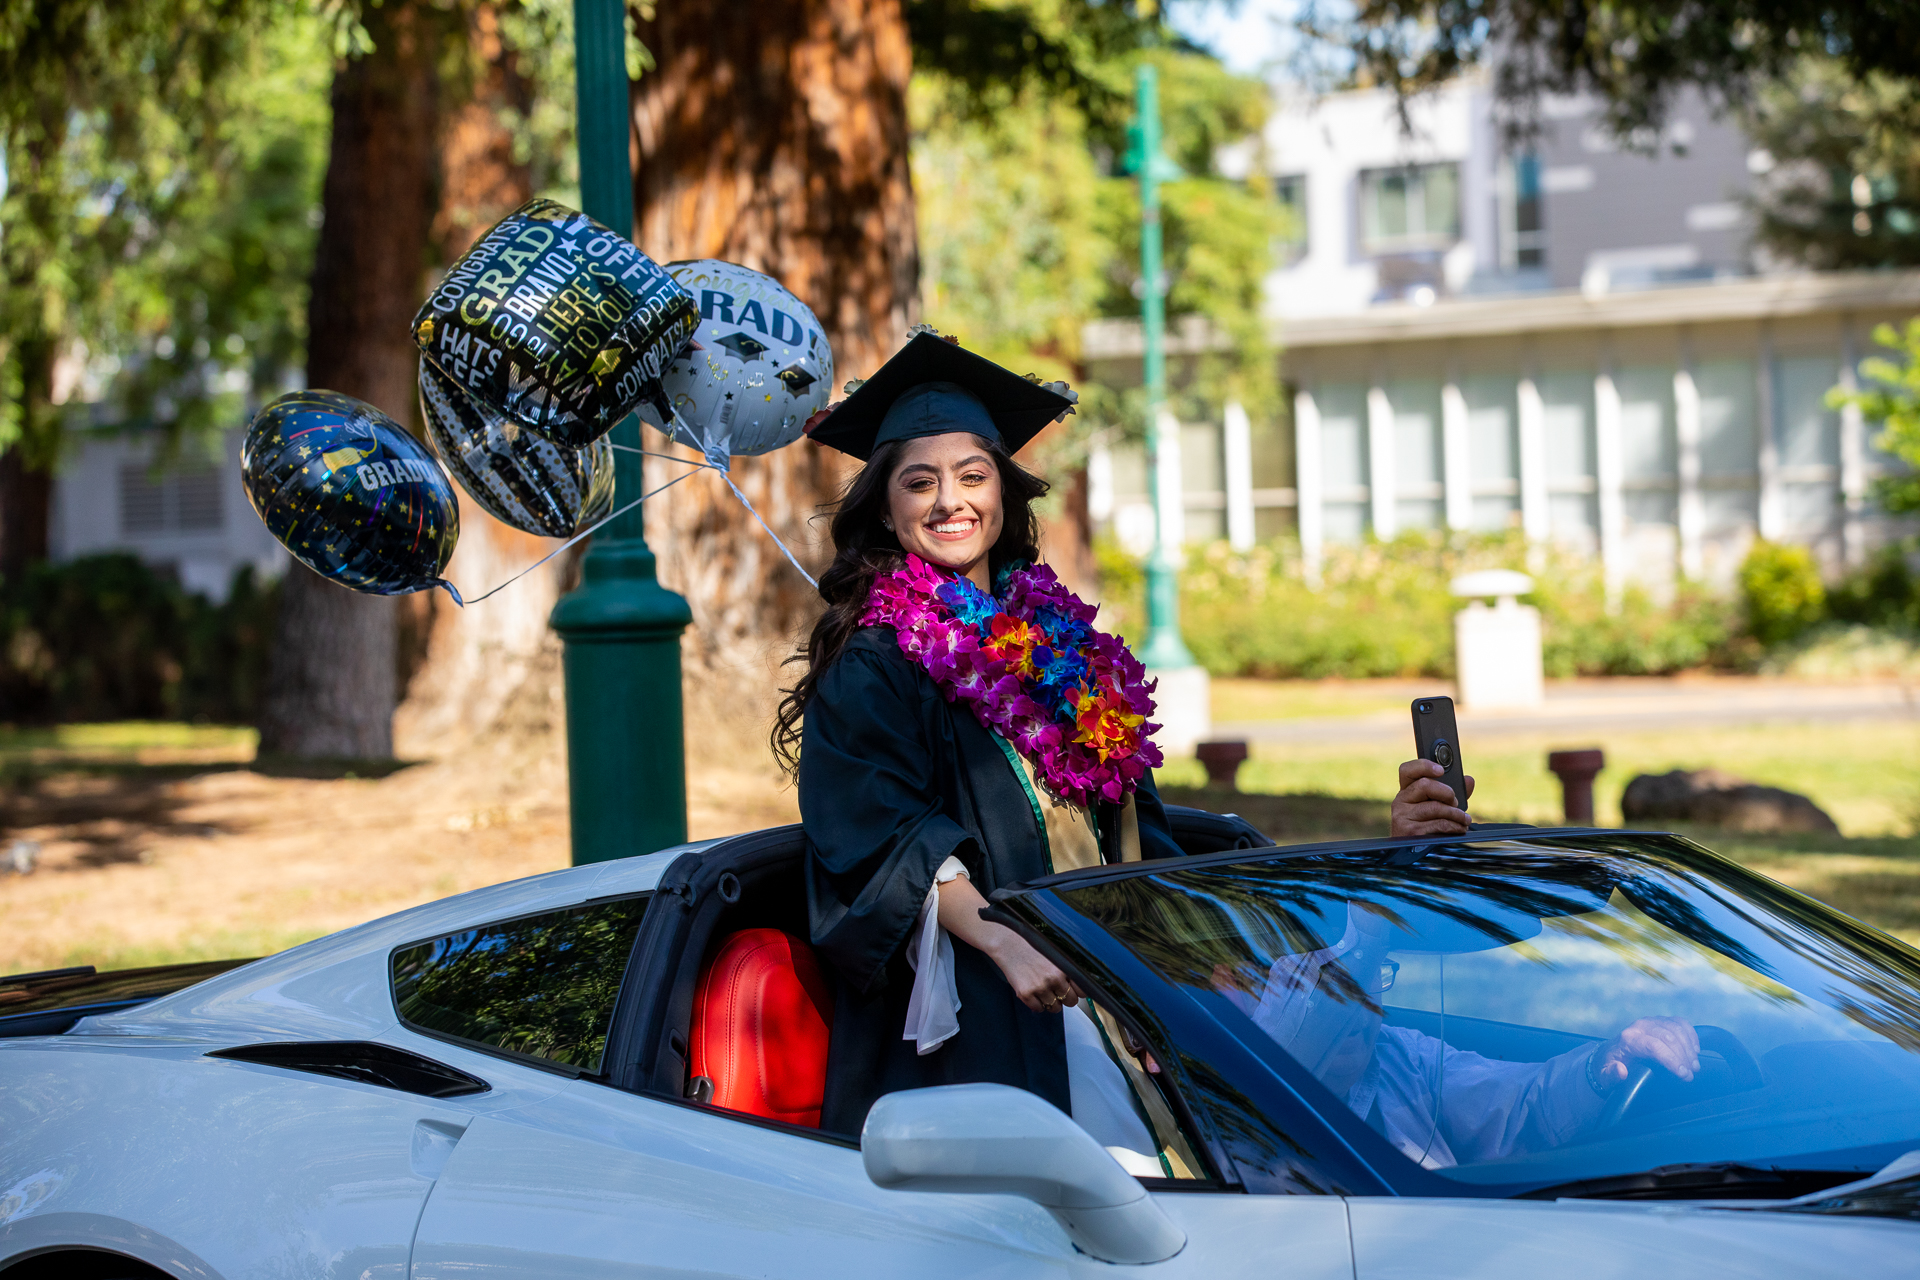 A car decorated with a flag reading "Congrats Grad" drives through campus, as people cheer from the sidewalk.